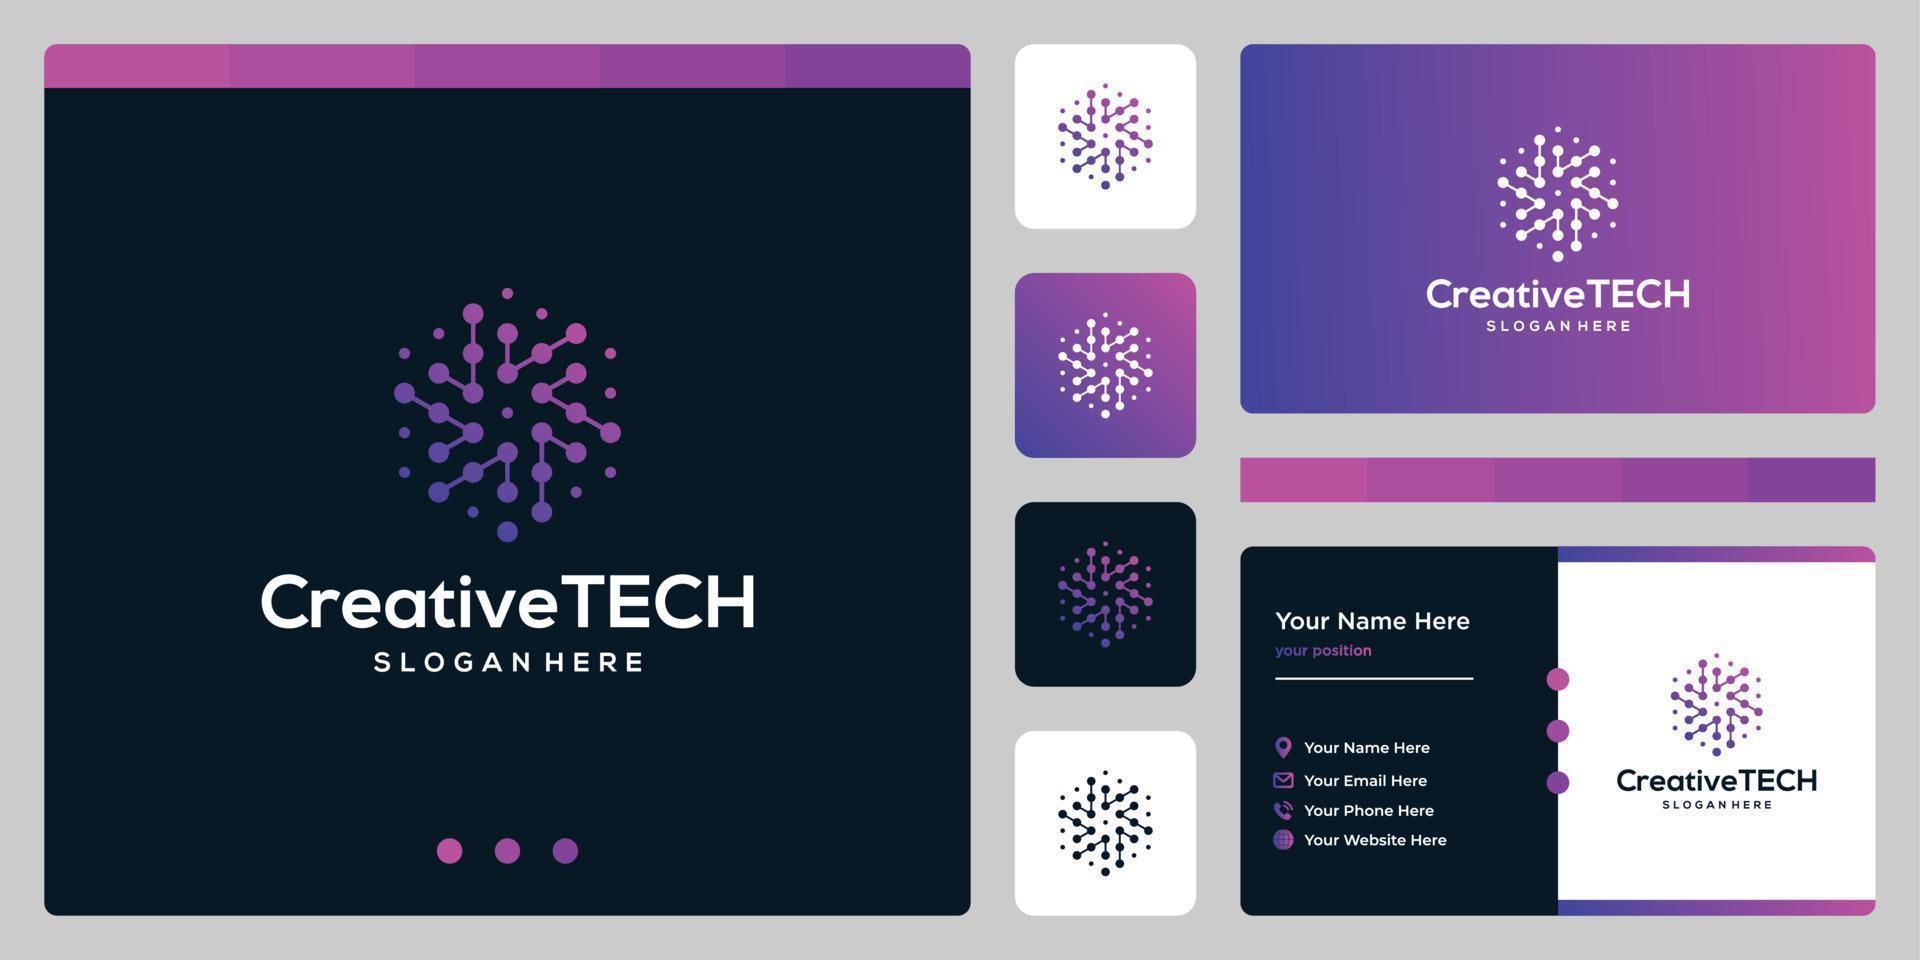 Inspiration logo check mark abstract with tech style and gradient color. Business card template vector